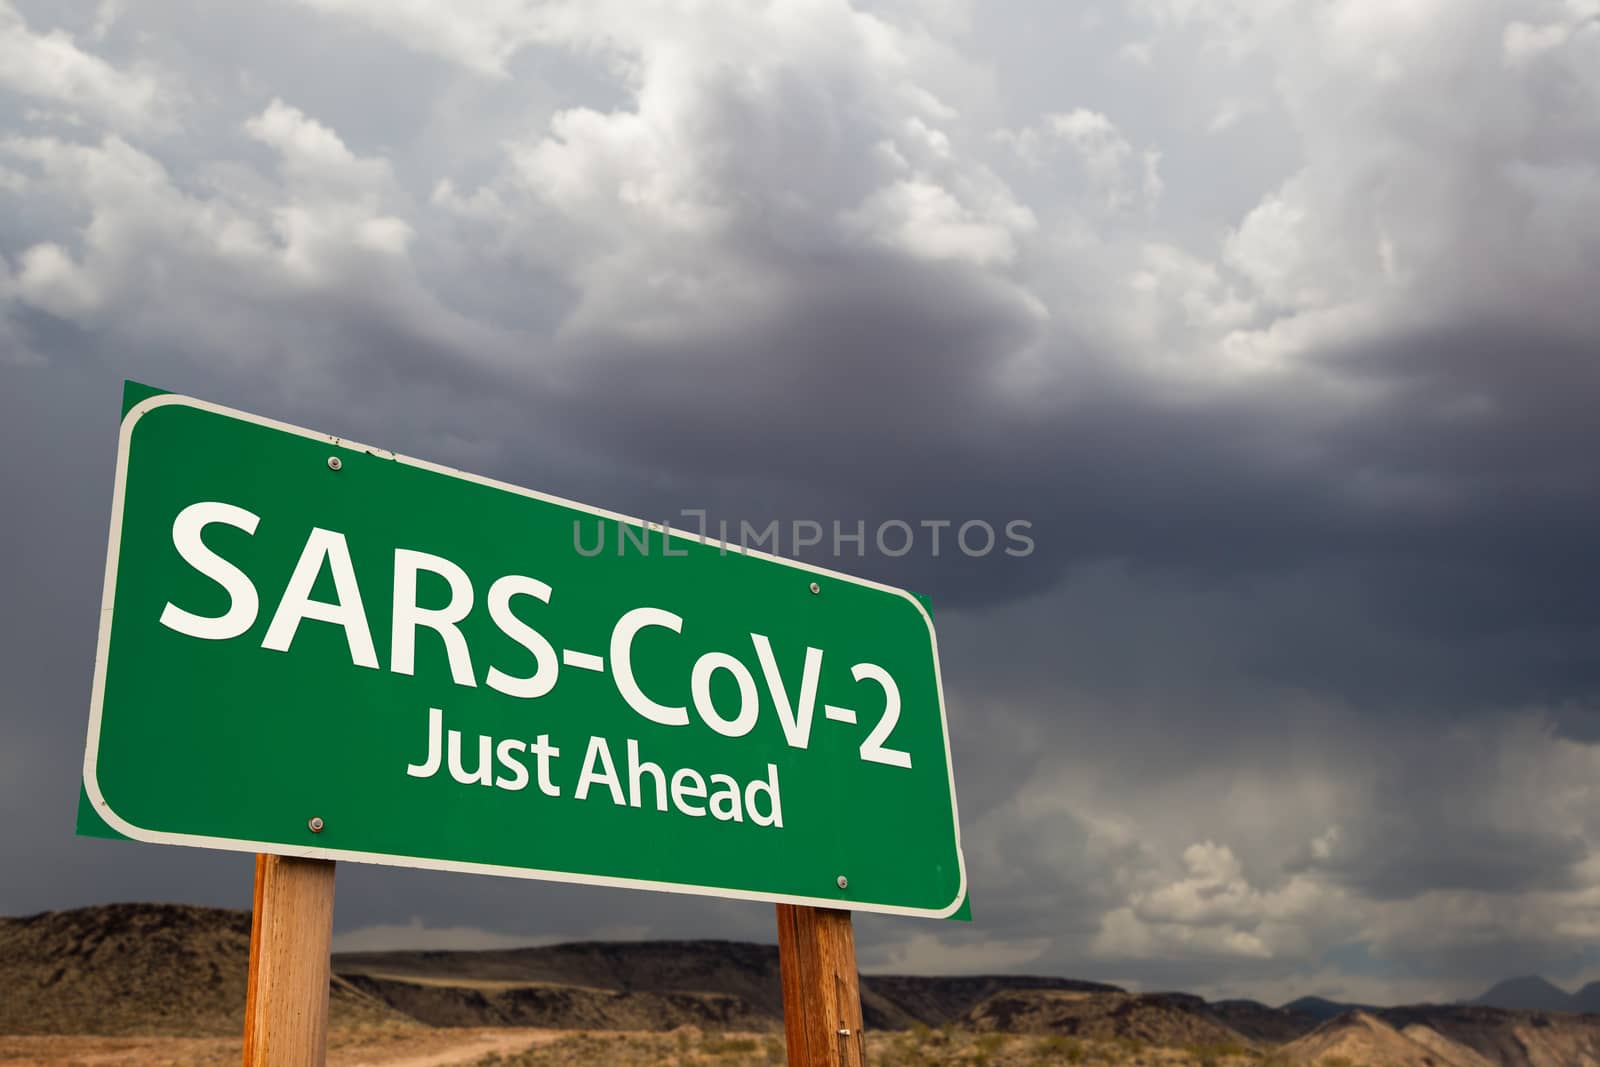 SARS-CoV-2 Coronavirus Green Road Sign Against Ominous Stormy Cloudy Sky. by Feverpitched